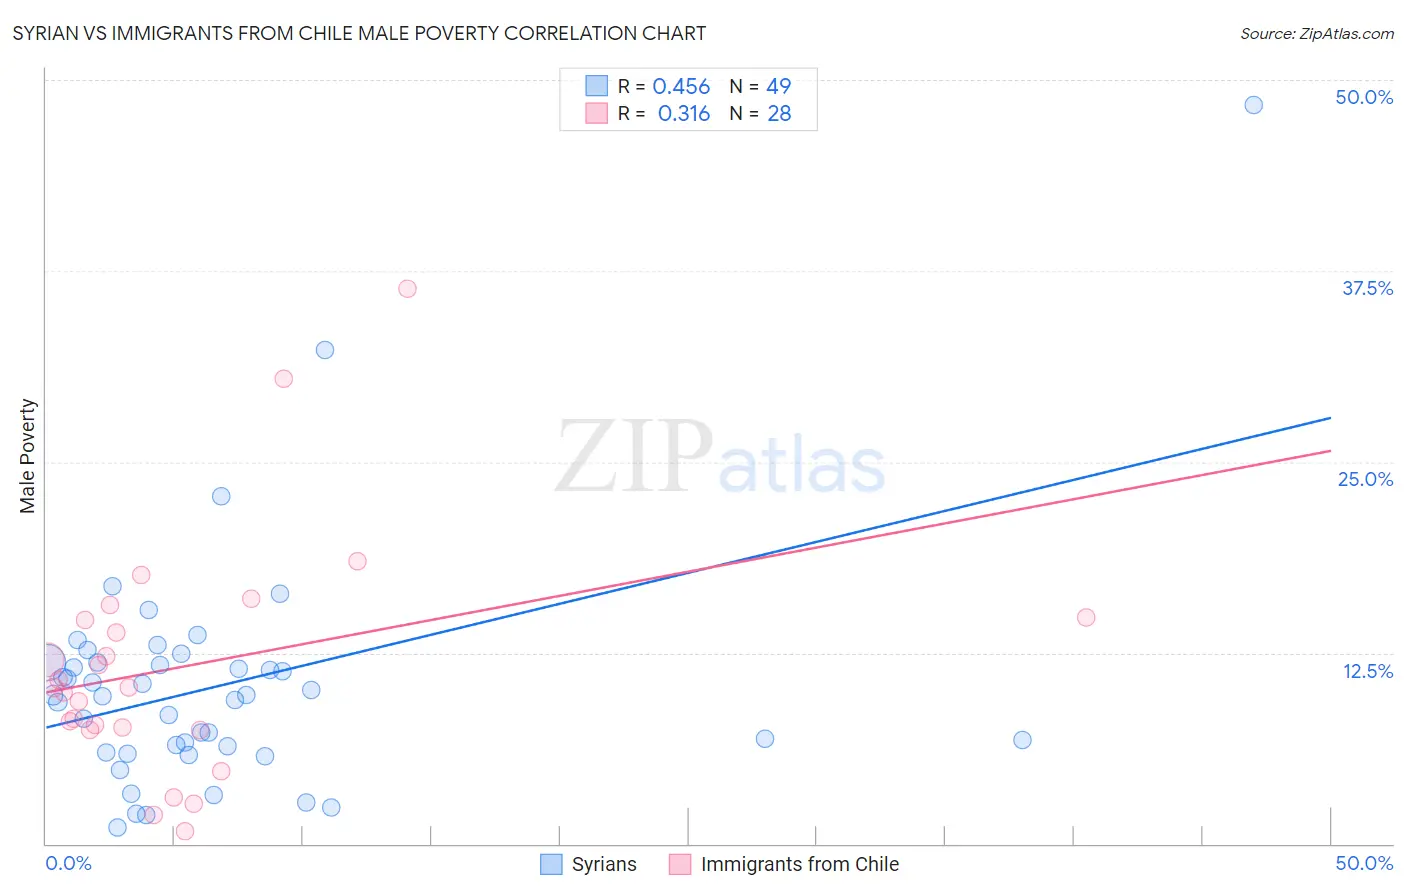 Syrian vs Immigrants from Chile Male Poverty